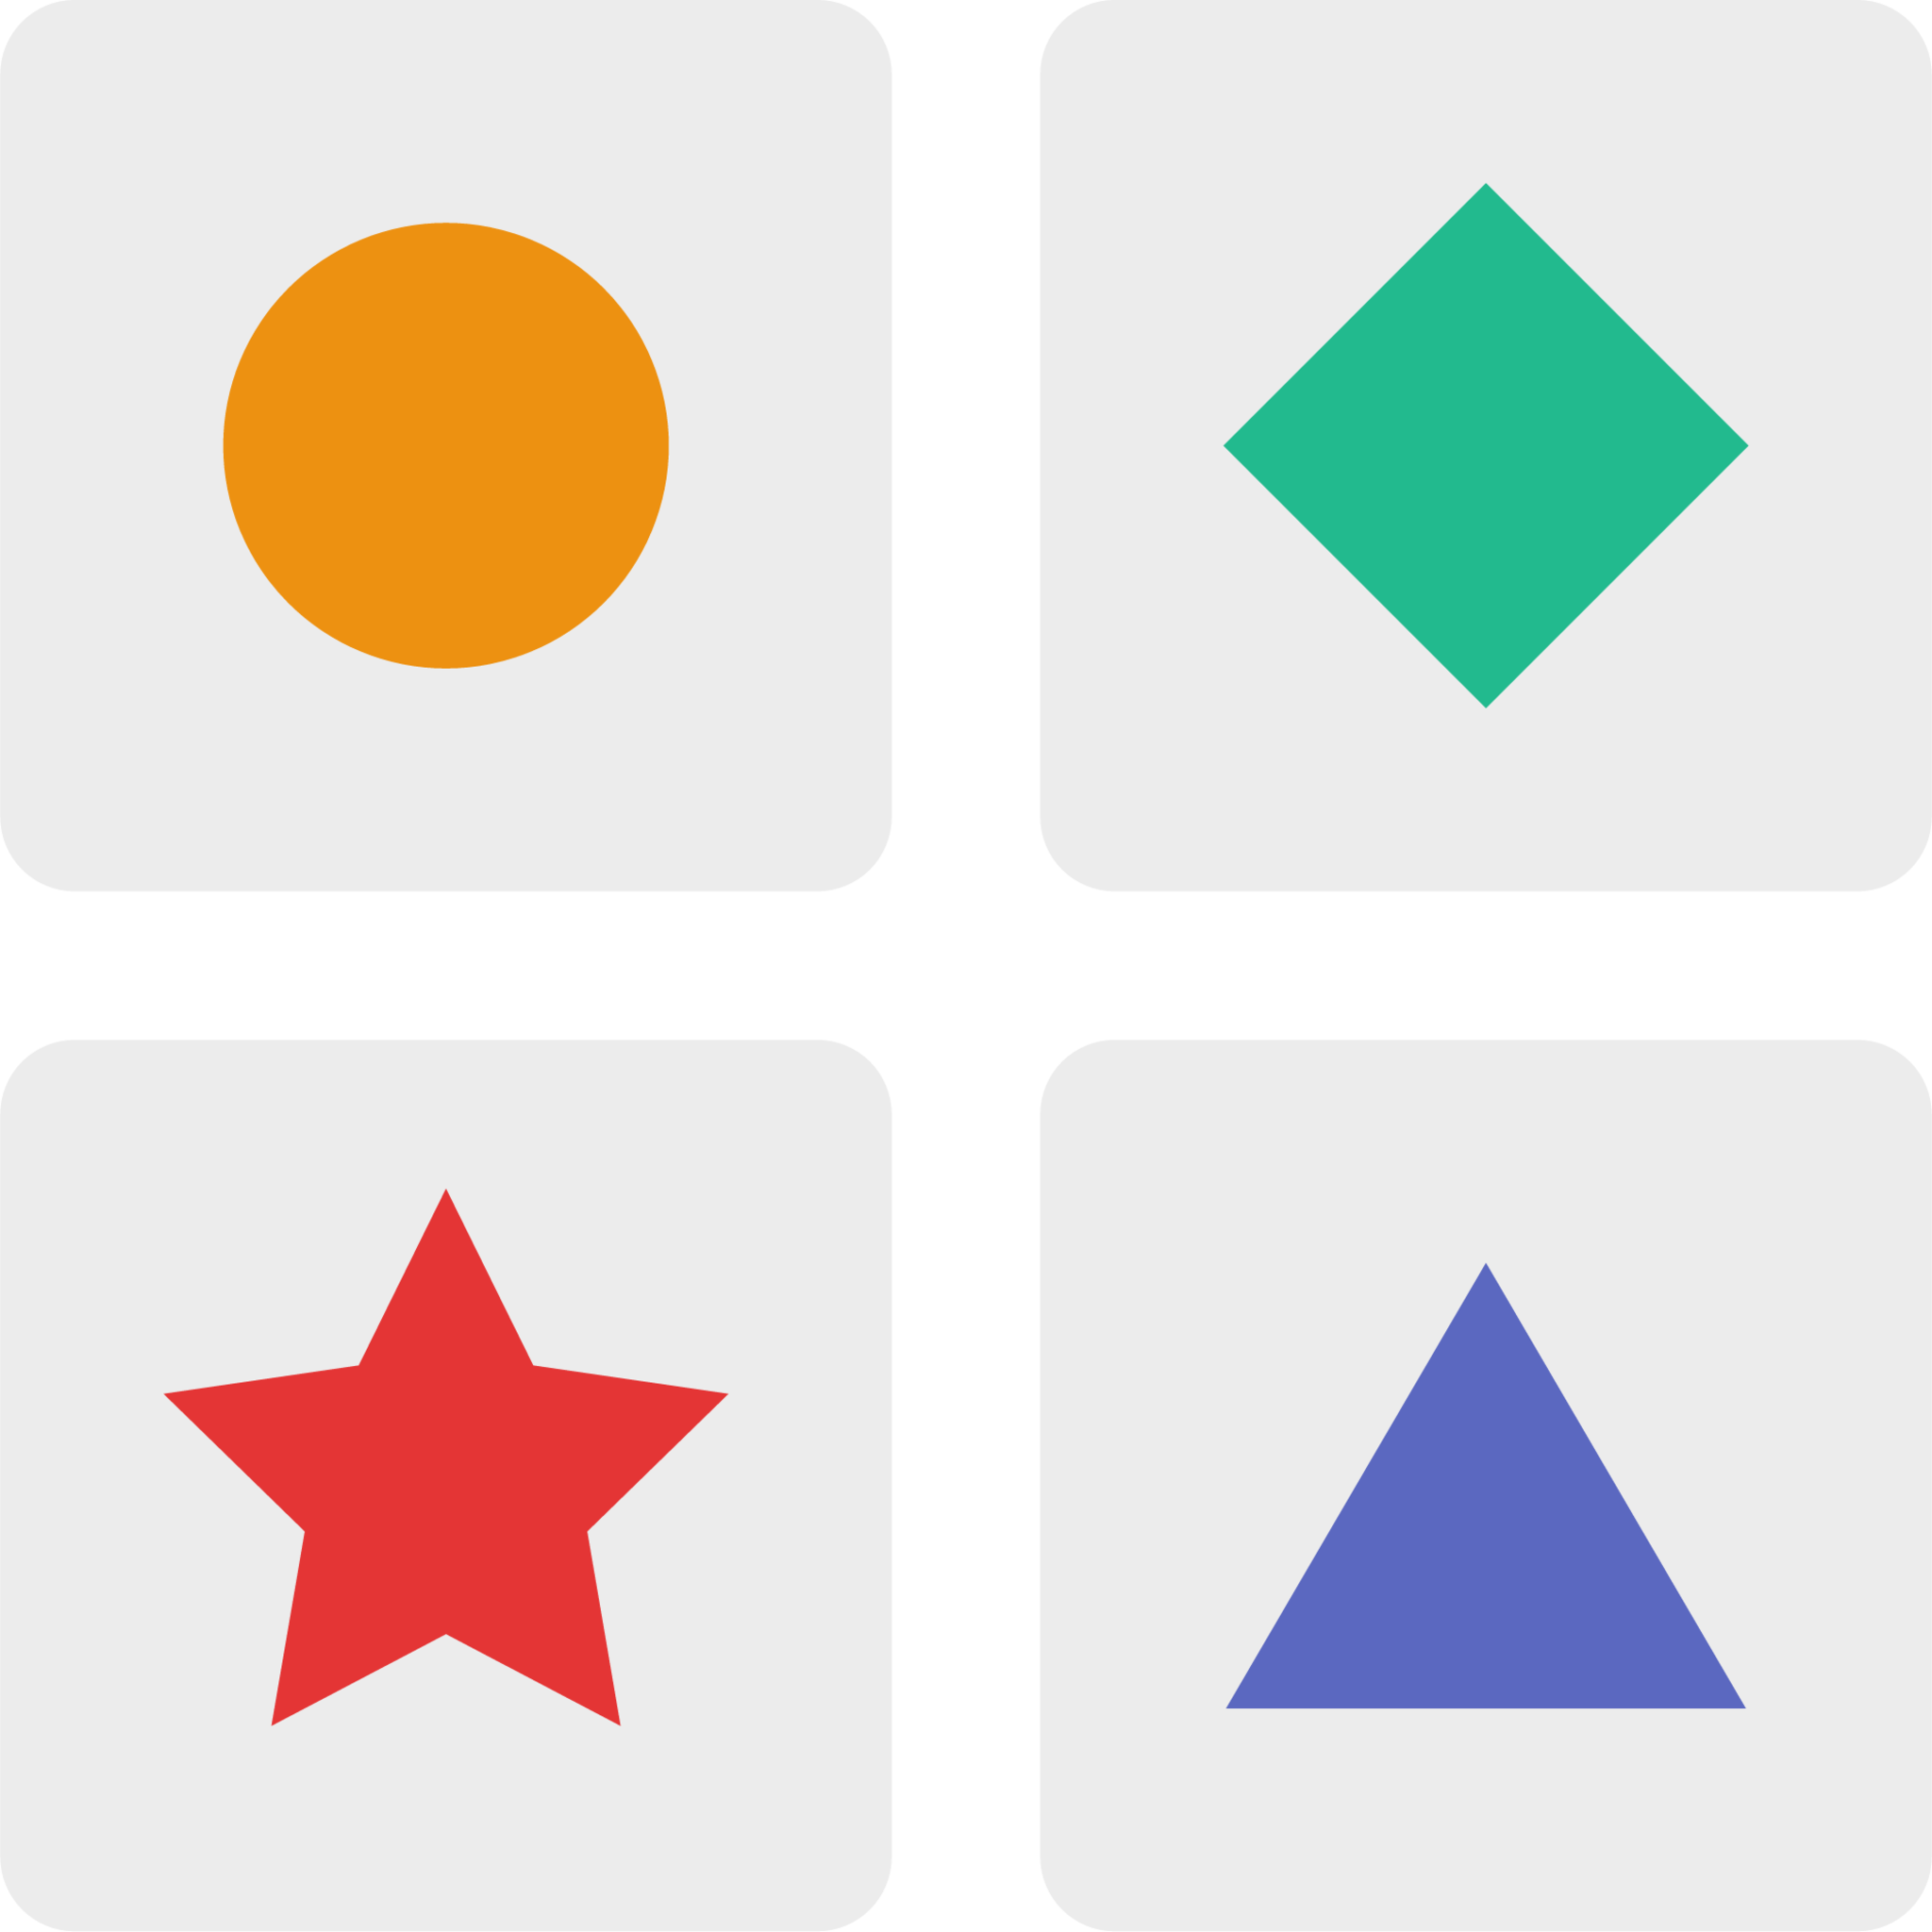 card shapes icon